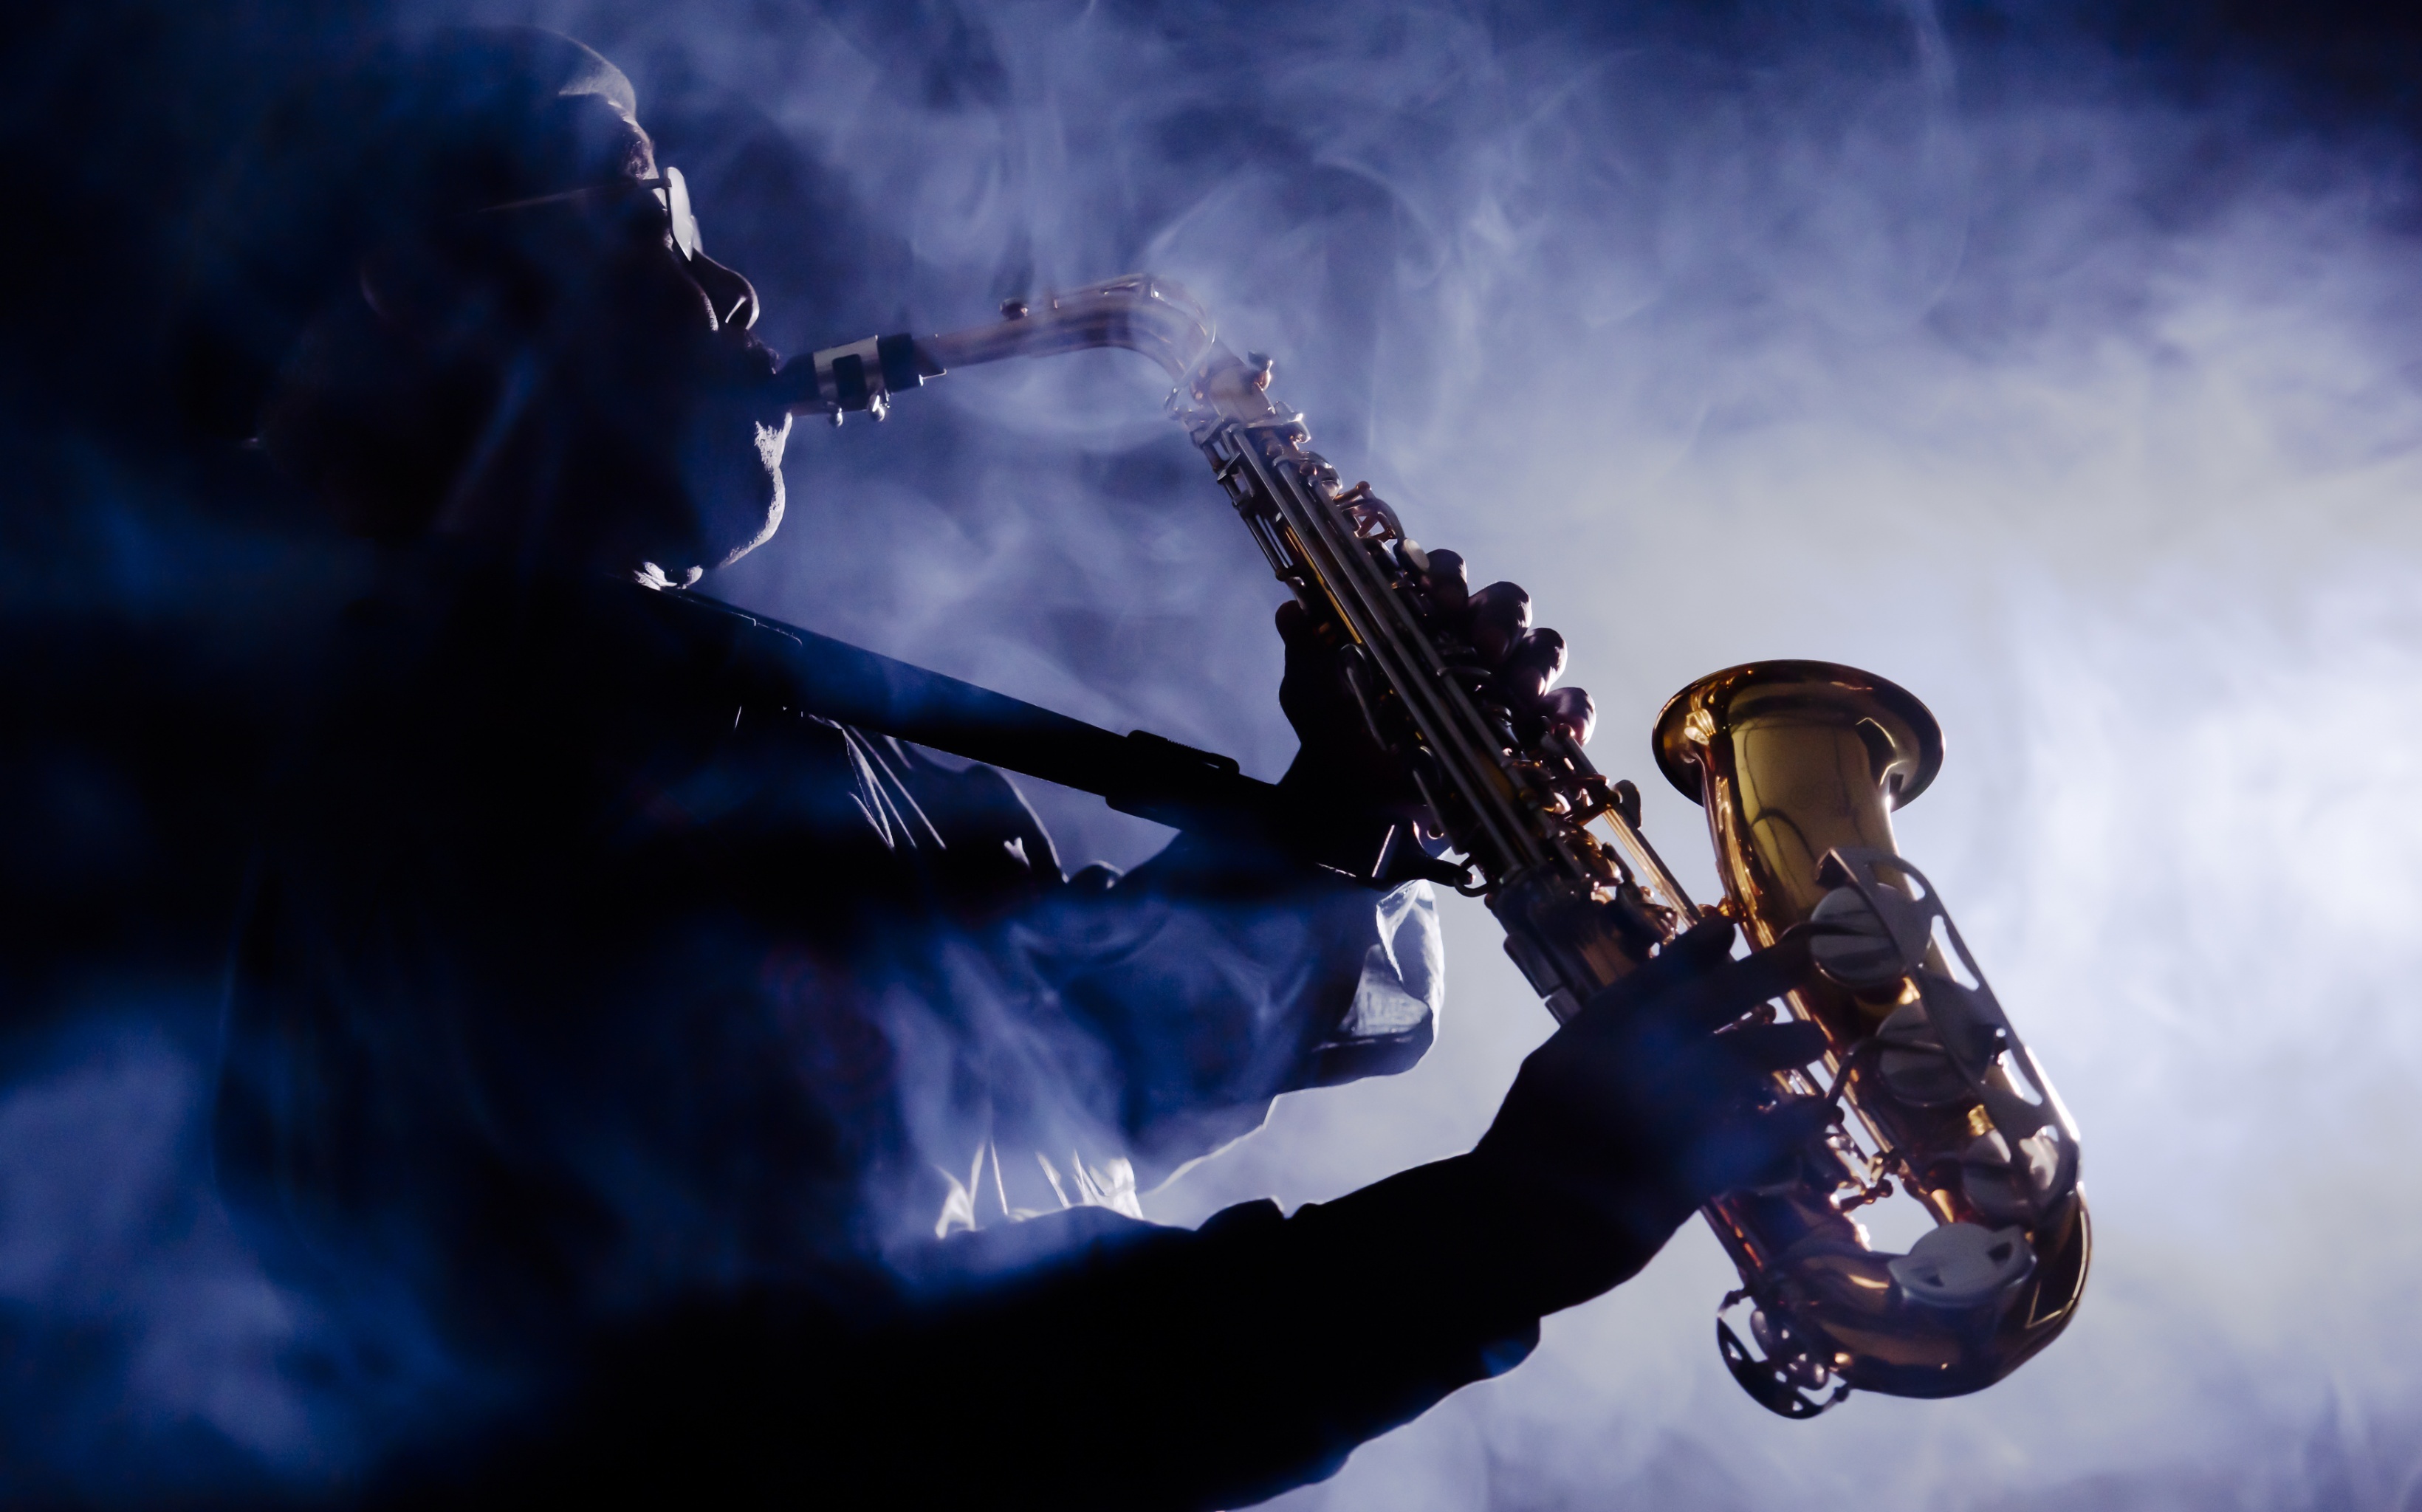 Saxophone: A single-reed woodwind instrument characterized by a conical metal tube and finger keys. 3280x2050 HD Background.